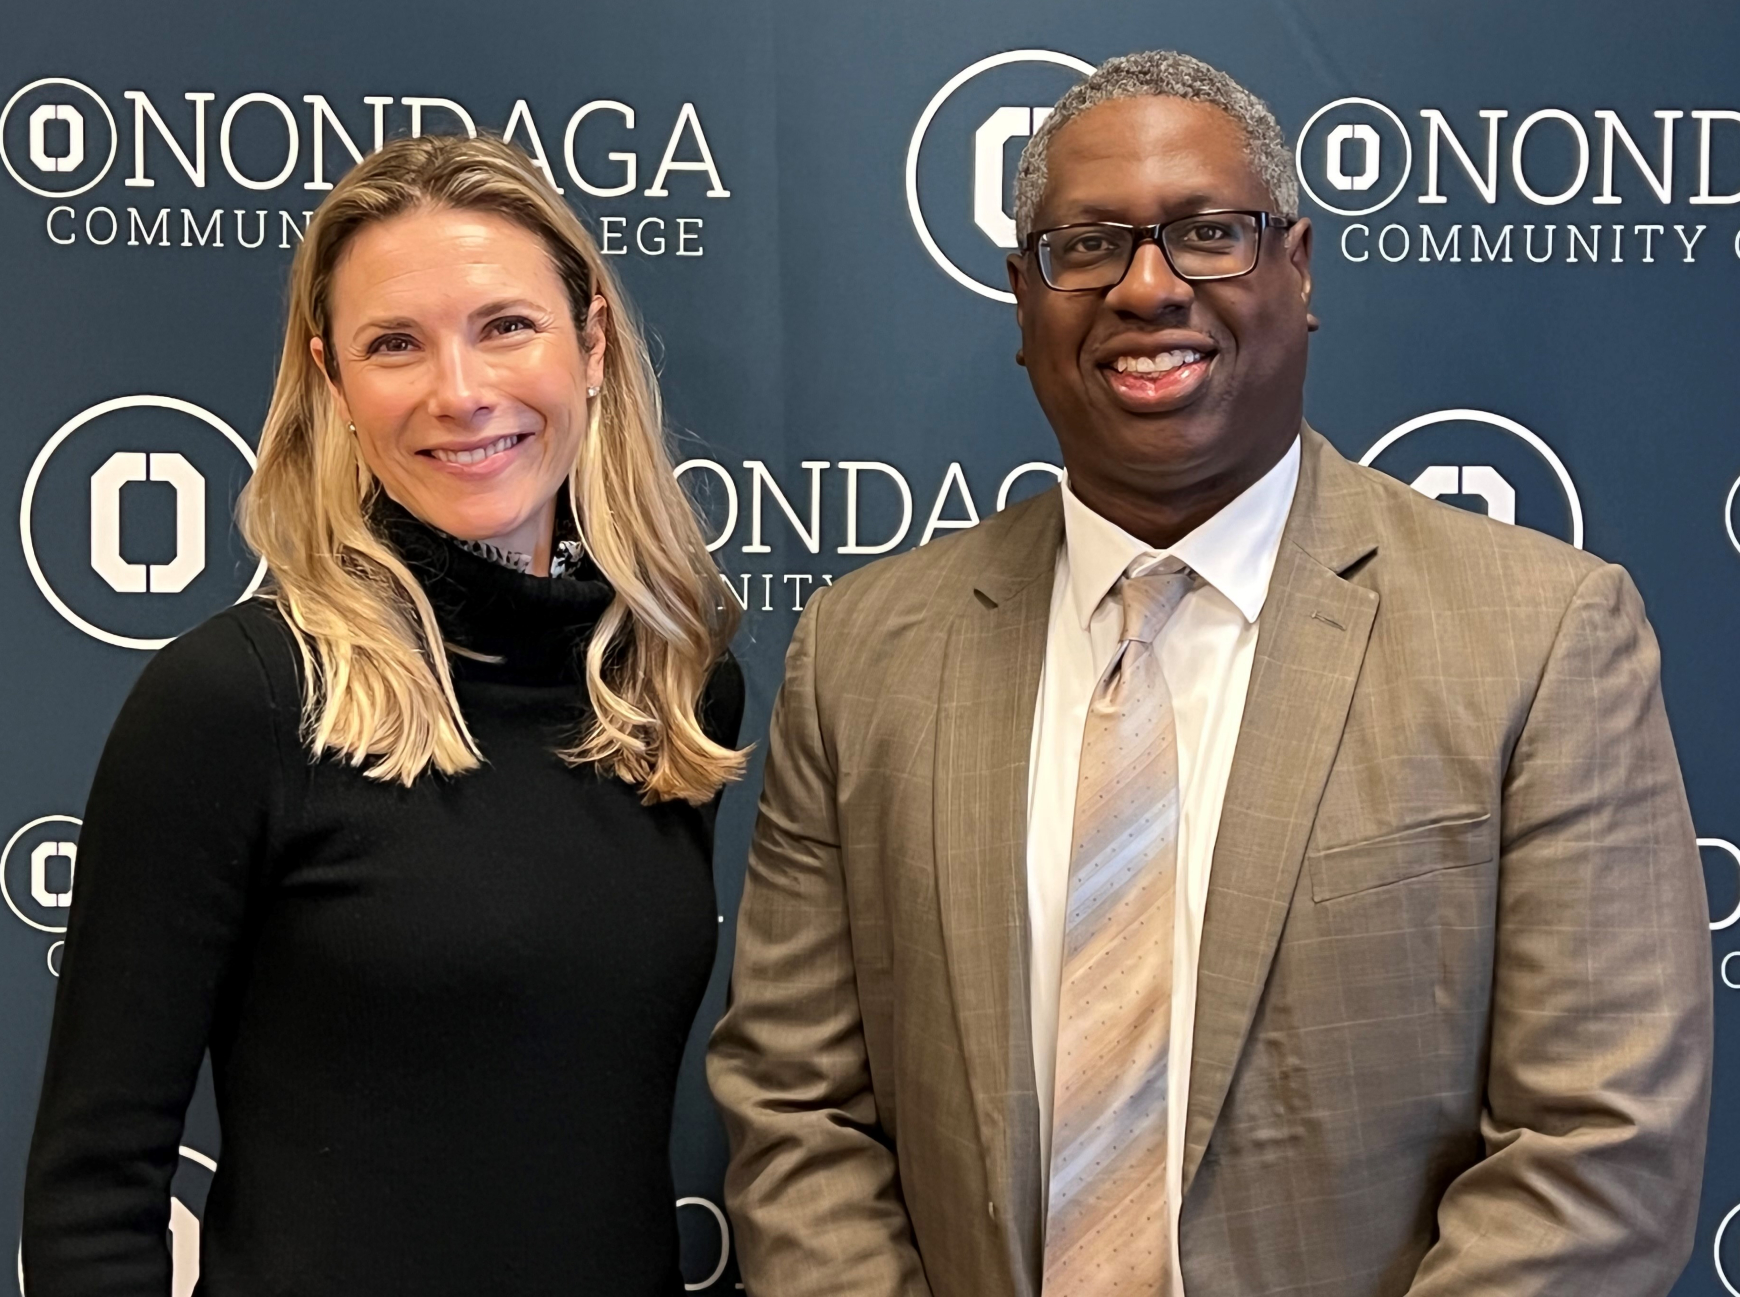 Carley Graham Garcia, Amazon's Head of Community Affairs in New York (left) is pictured with OCC President Dr. Warren Hilton (right).